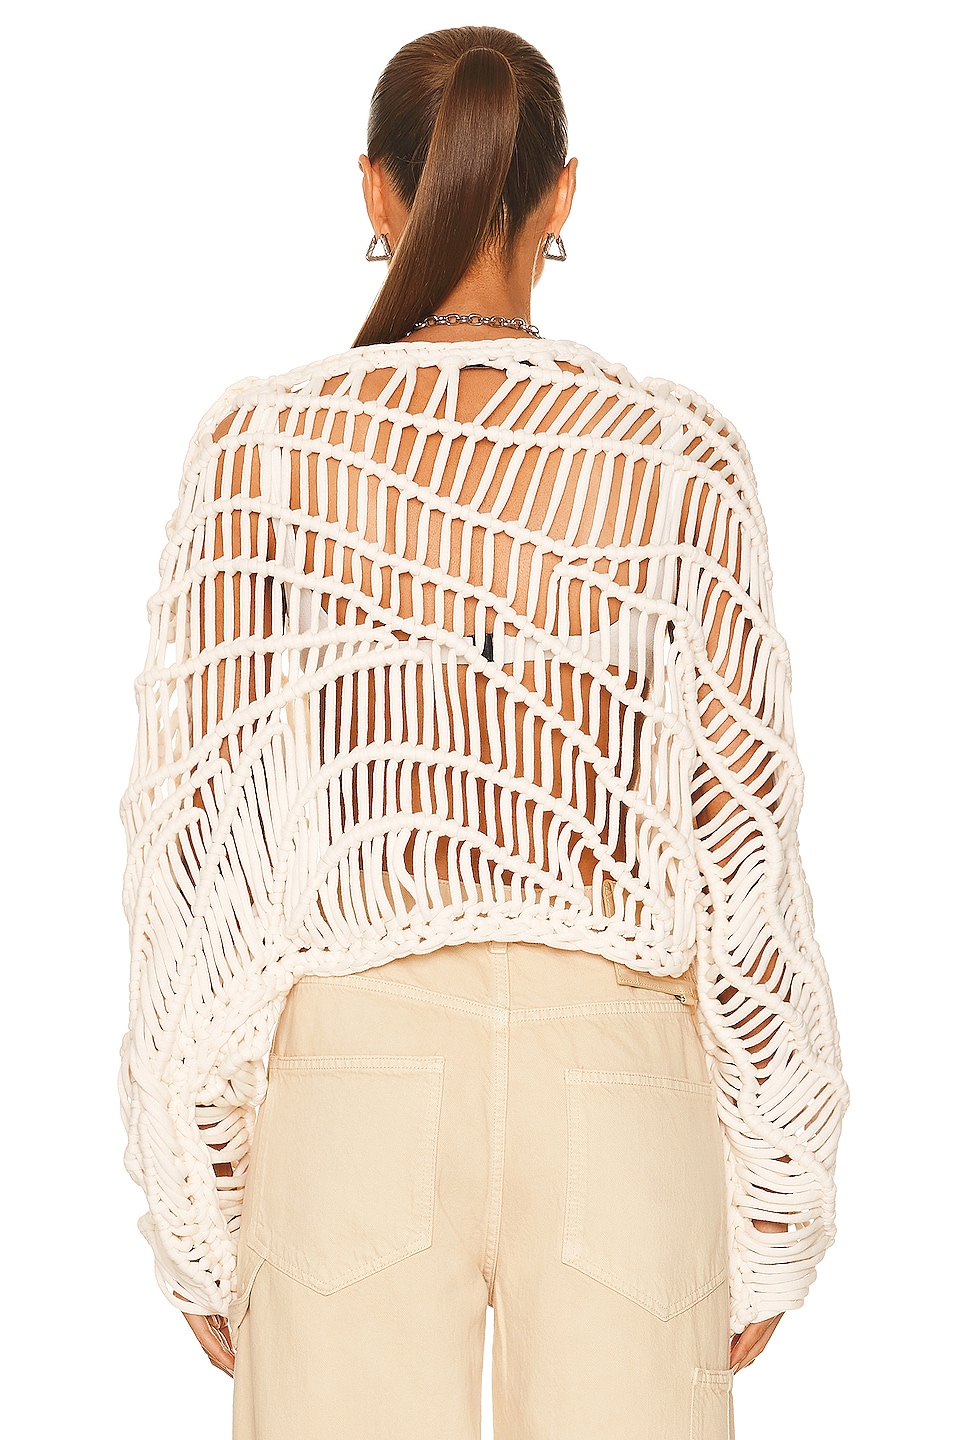 Aisling Camps Ripple Macrame Pullover in Ivory | FWRD